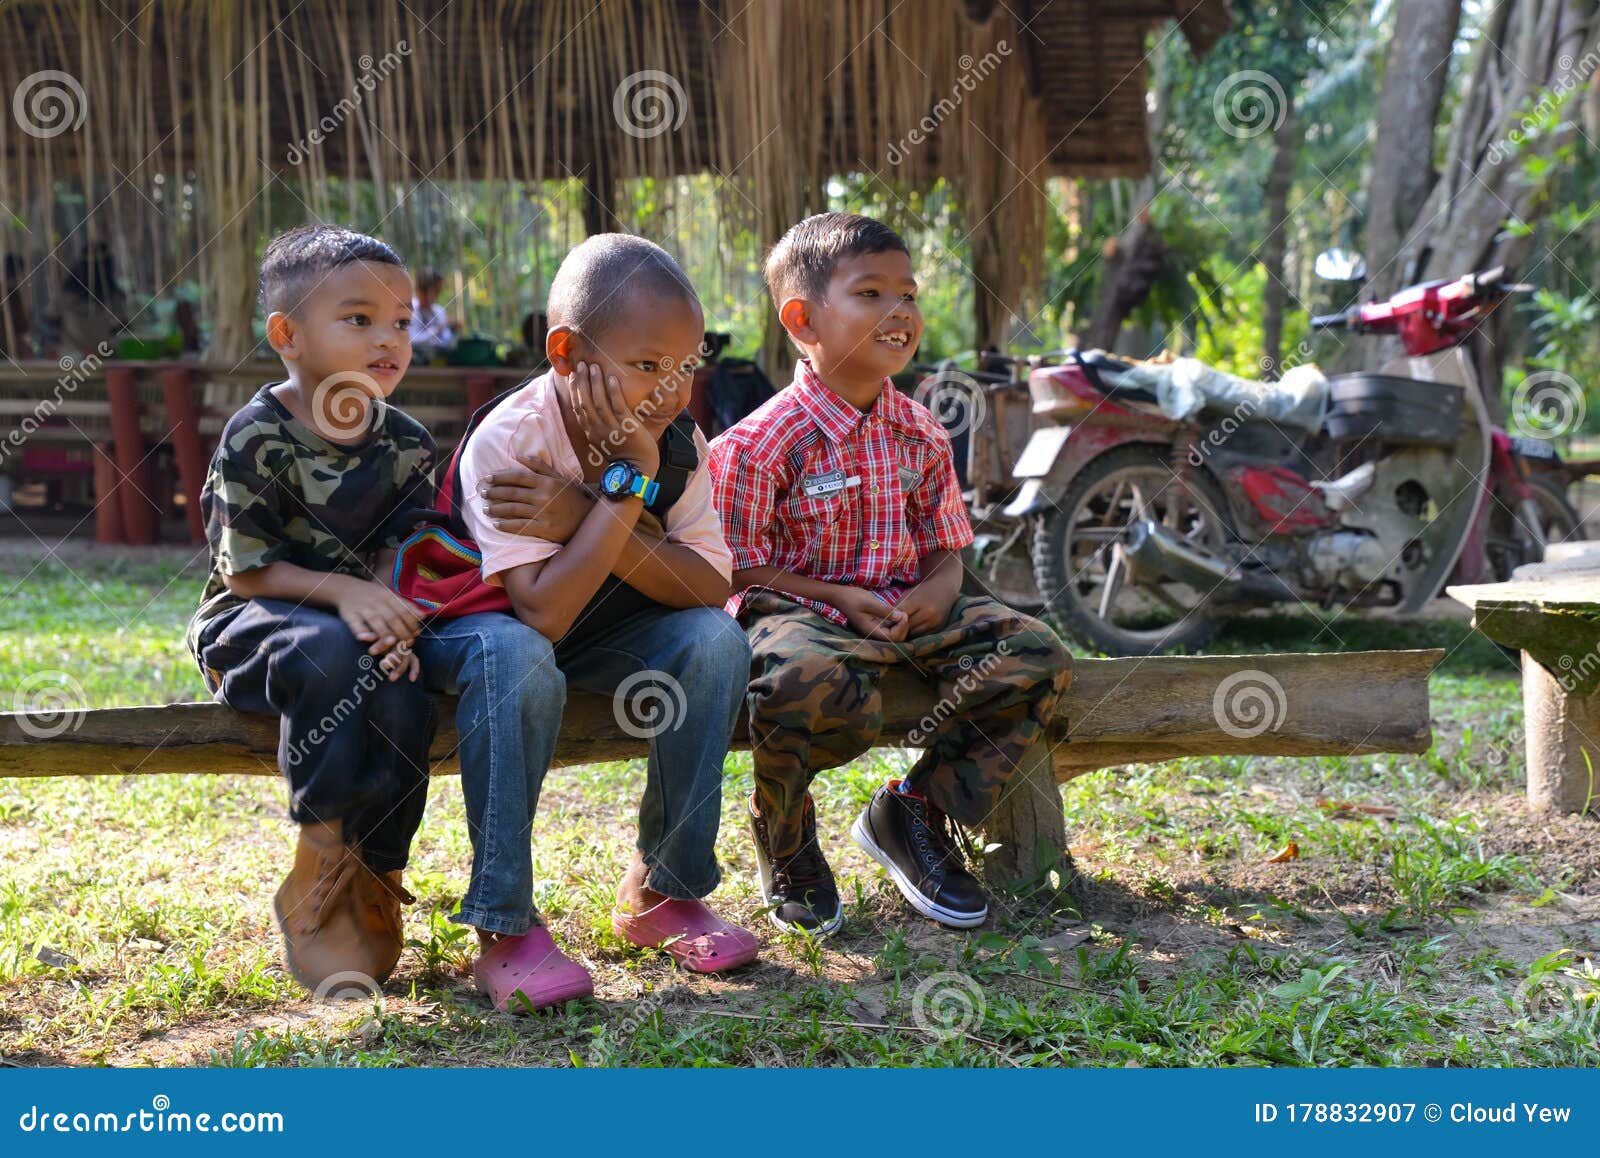 Children in Malaysia editorial image. Image of malay 